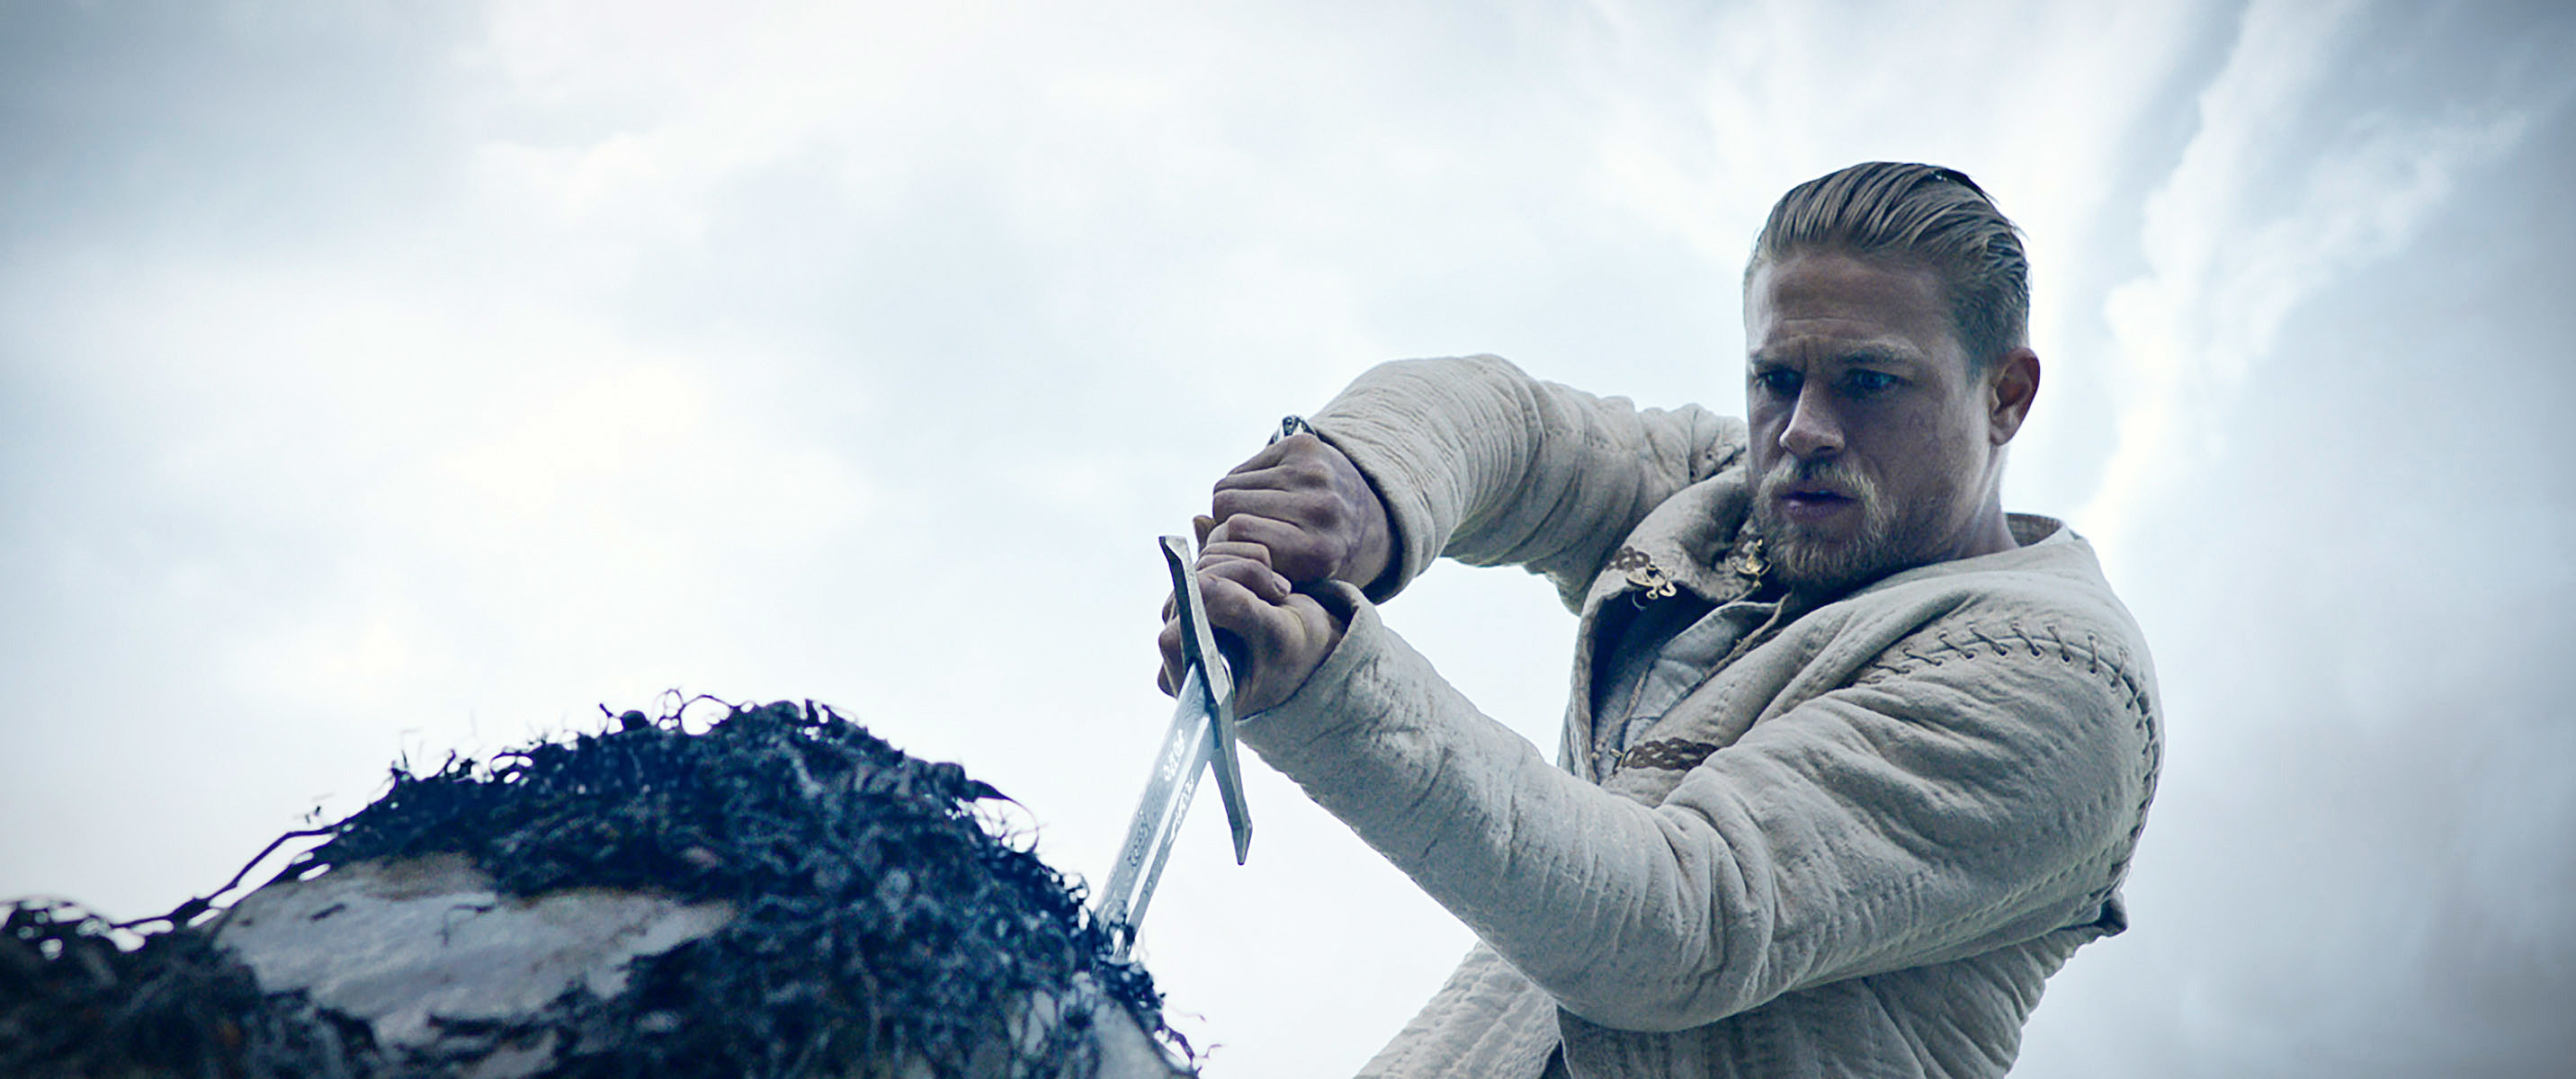 Charlie Hunnam pulling a sword out of a stone in a scene from King Arthur: Legend of the Sword